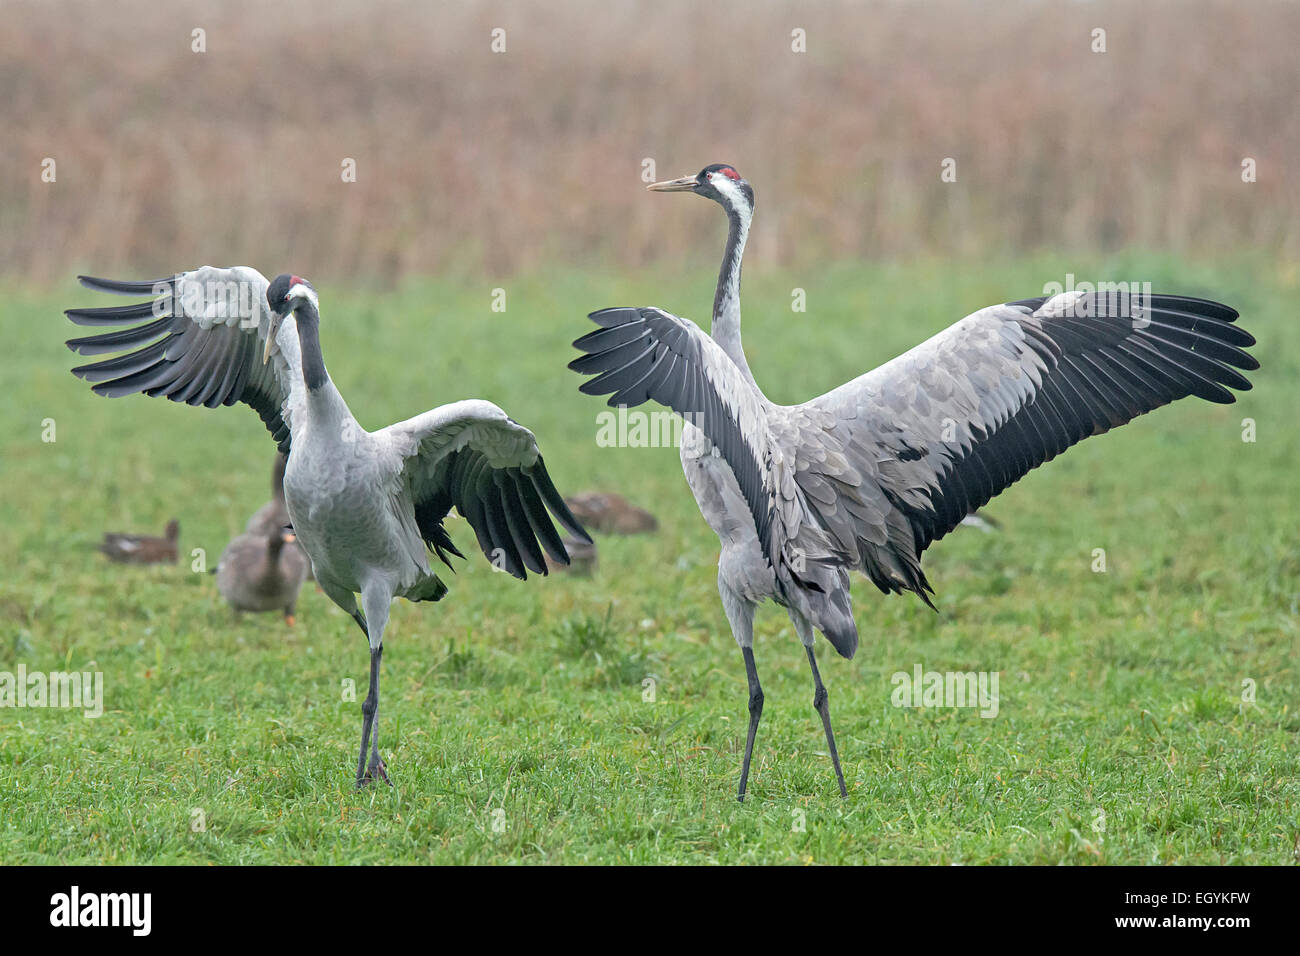 Two male cranes with spreading their wings Stock Photo